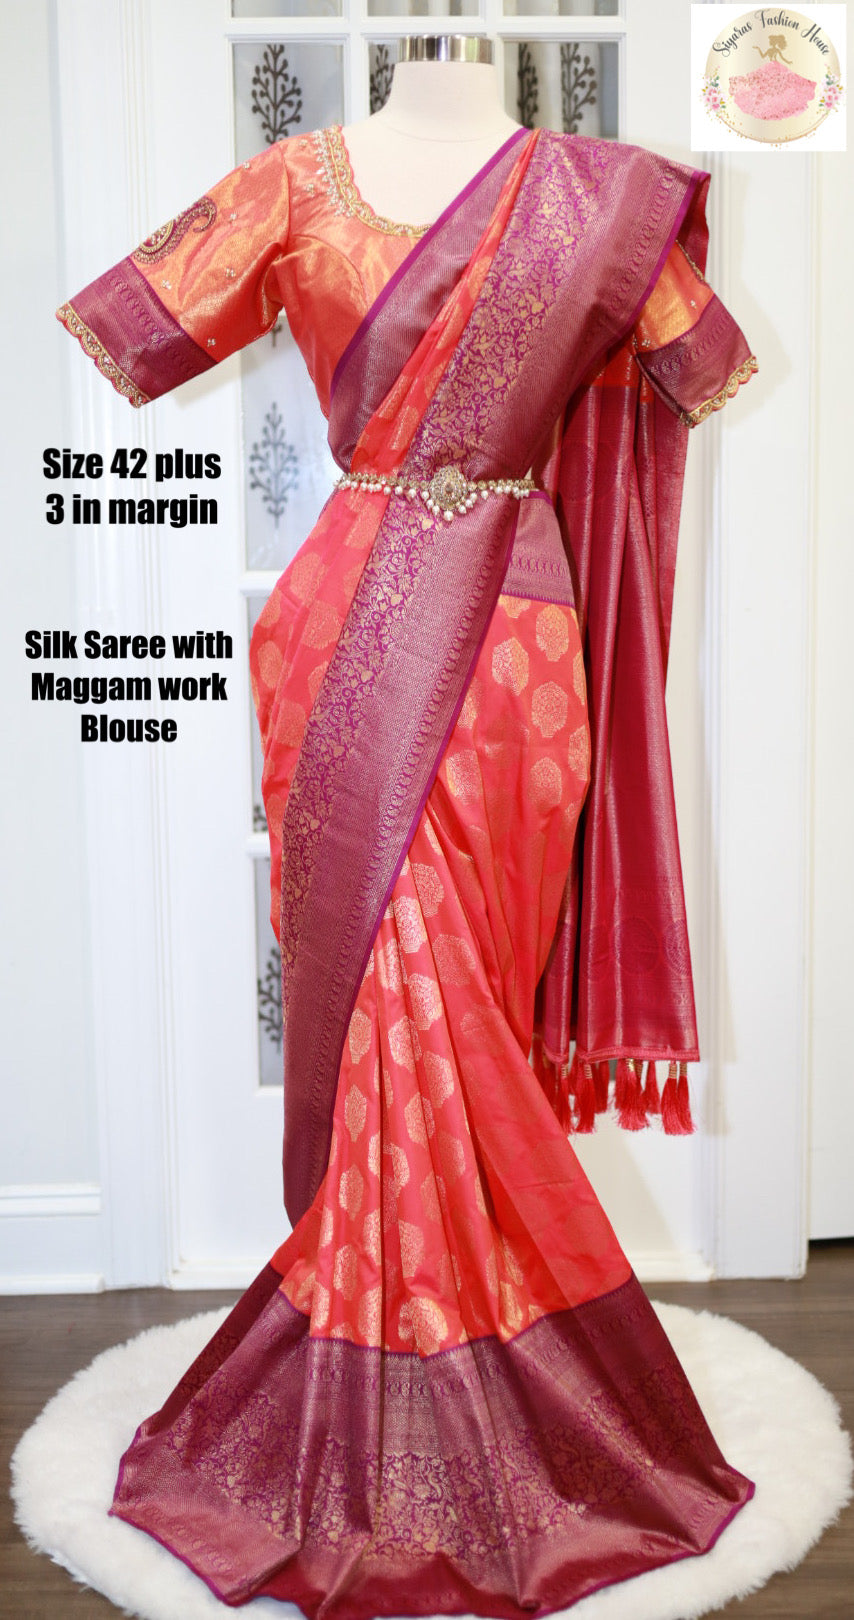 Silk Saree with Maggam work Blouse size 42 Ready to ship